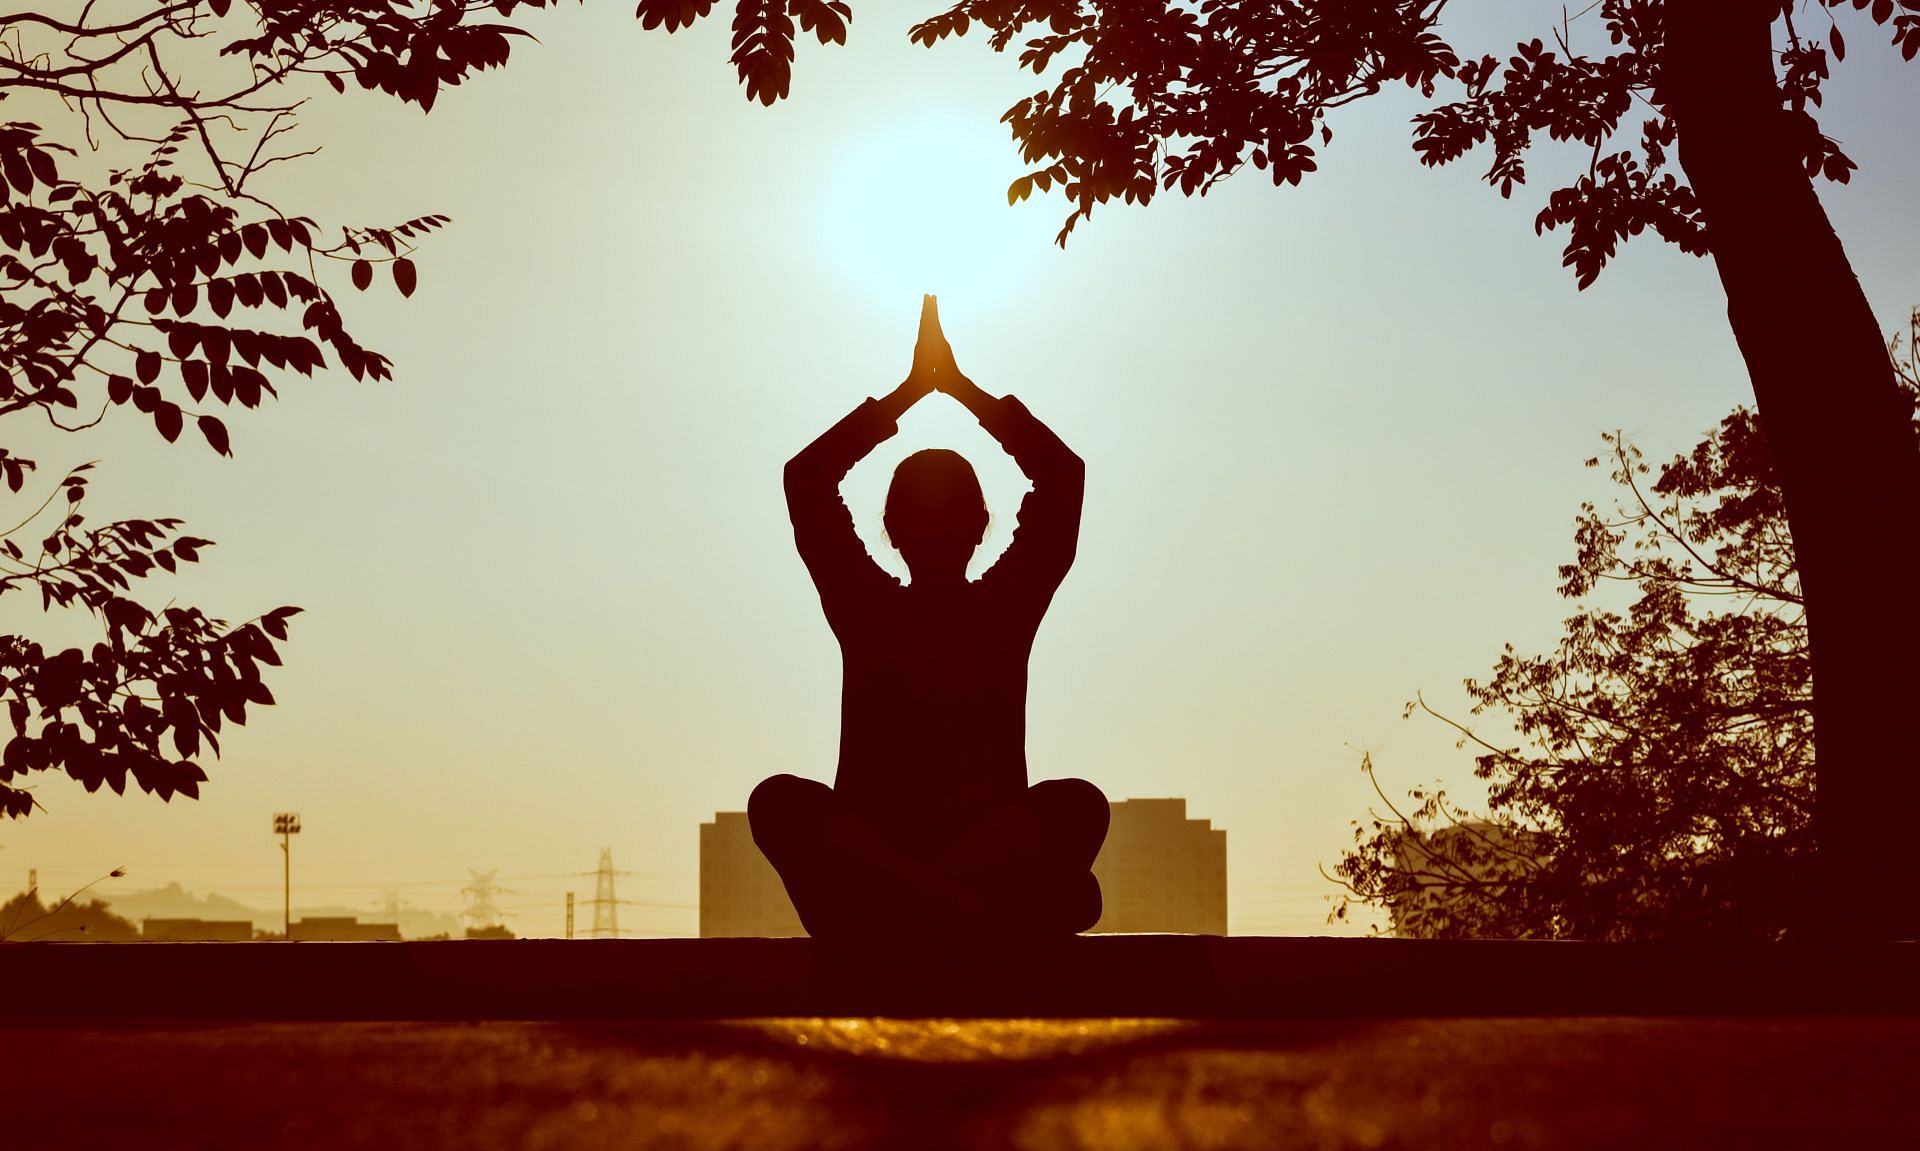 Sunlight and meditation has positive effects on dopamine levels in the body (Image via Pexels/Prasanth Inturi)